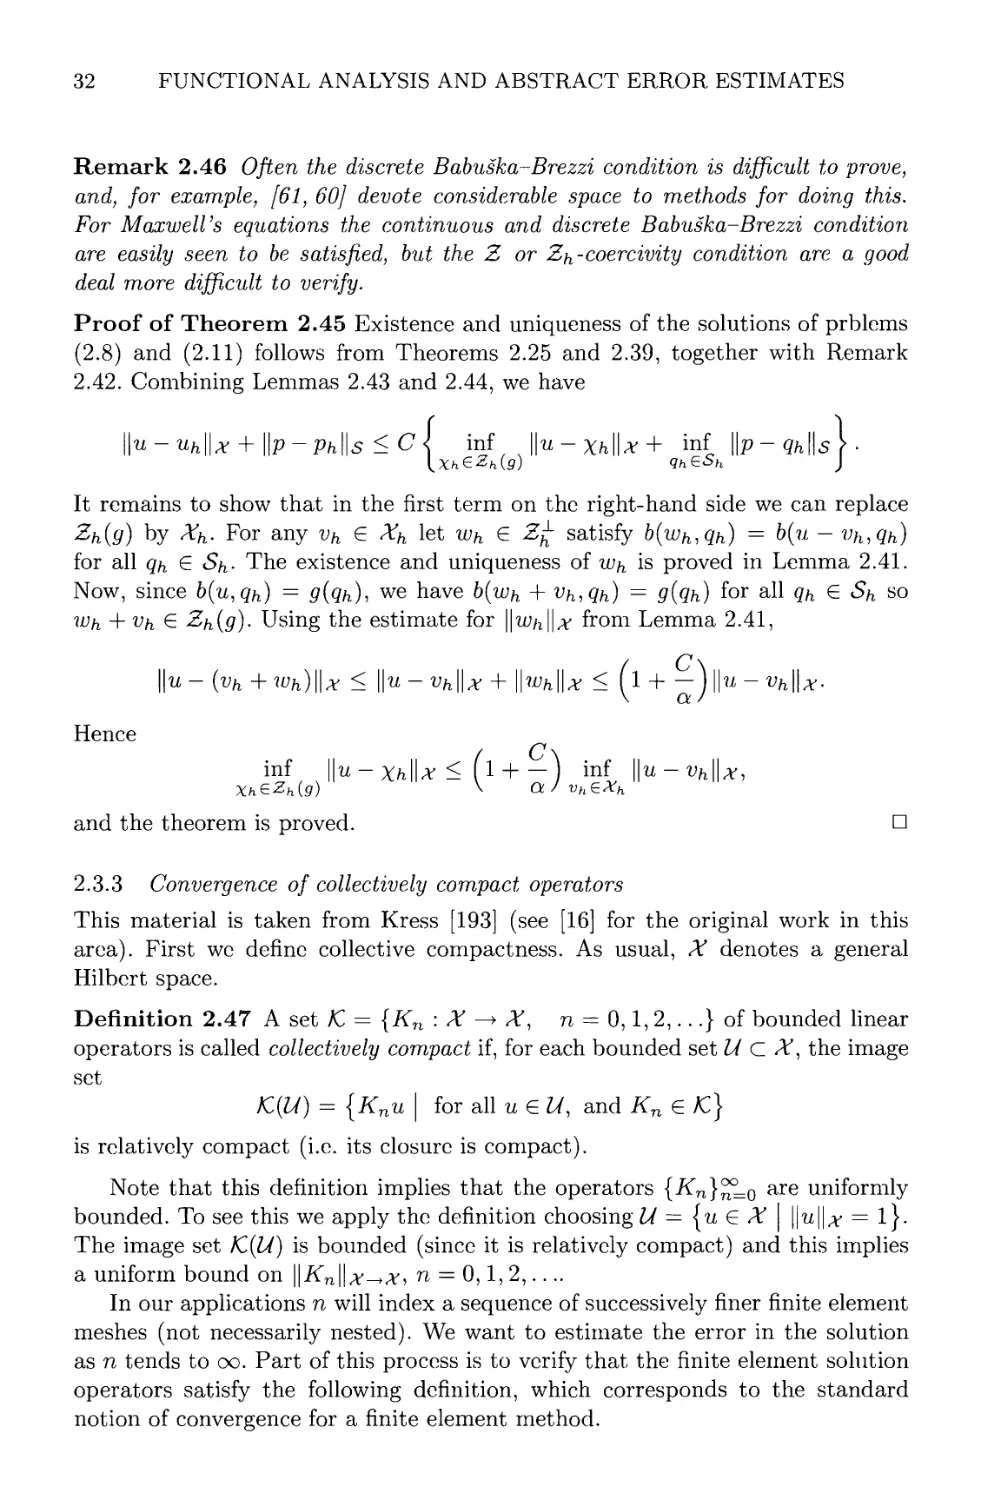 2.3.3 Convergence of collectively compact operators